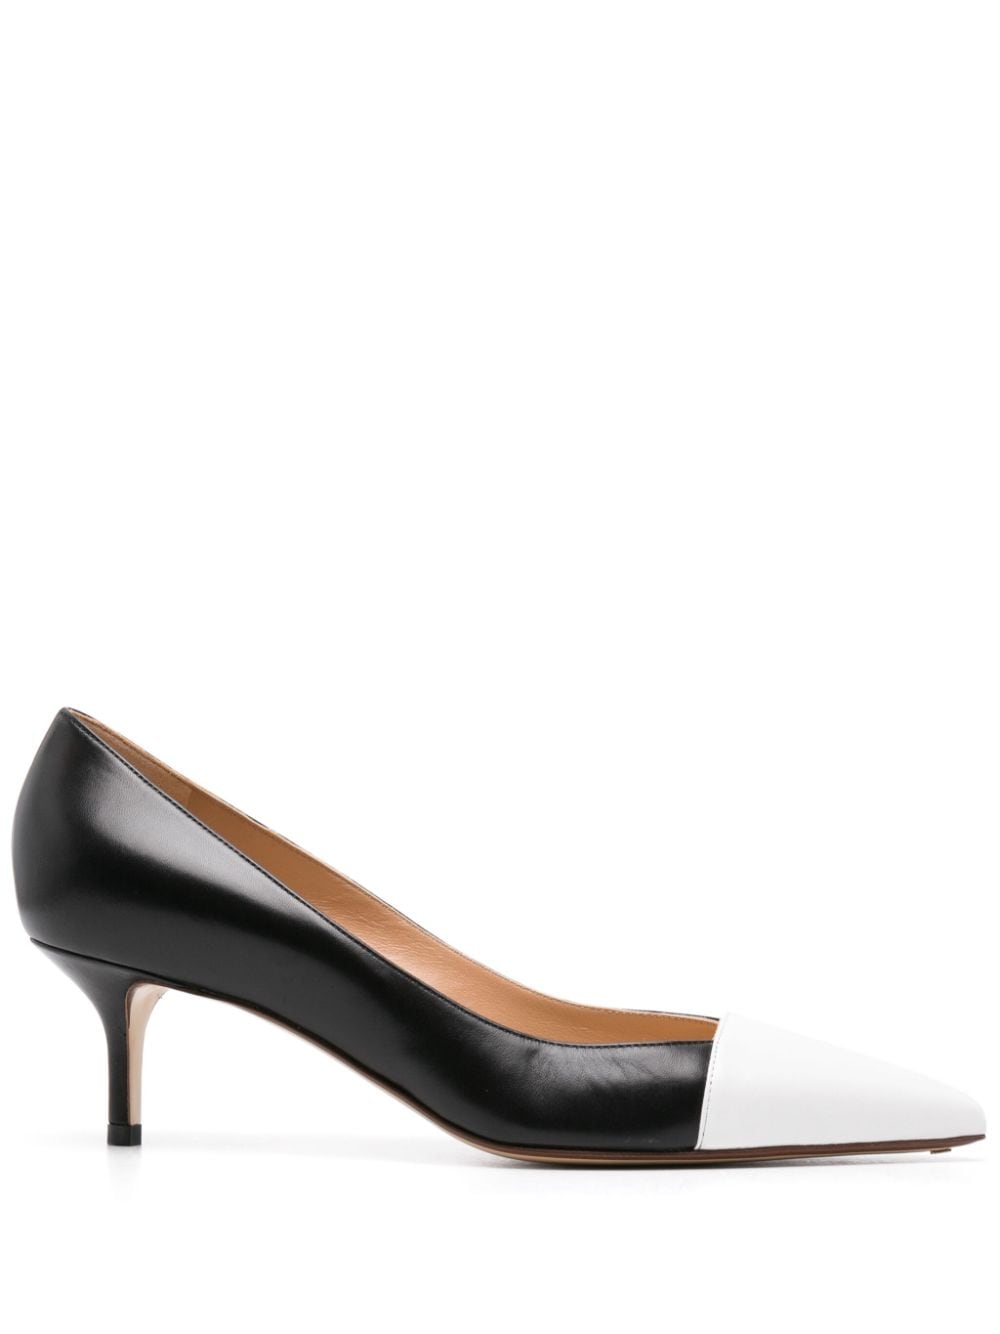 55mm leather pumps